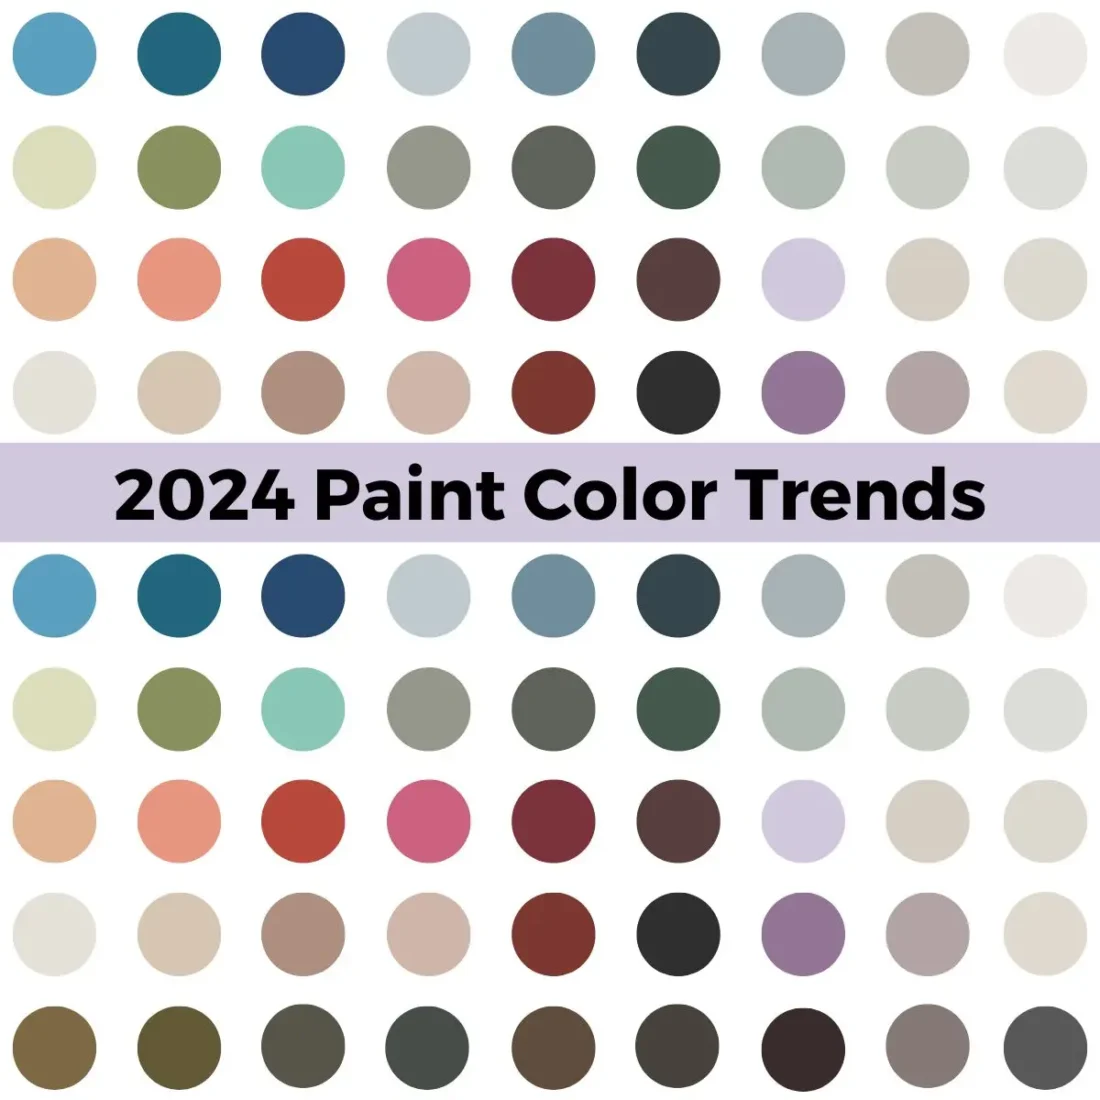 2024 Paint Color Trends Interior Designers Will Be Using 1100x1100.webp